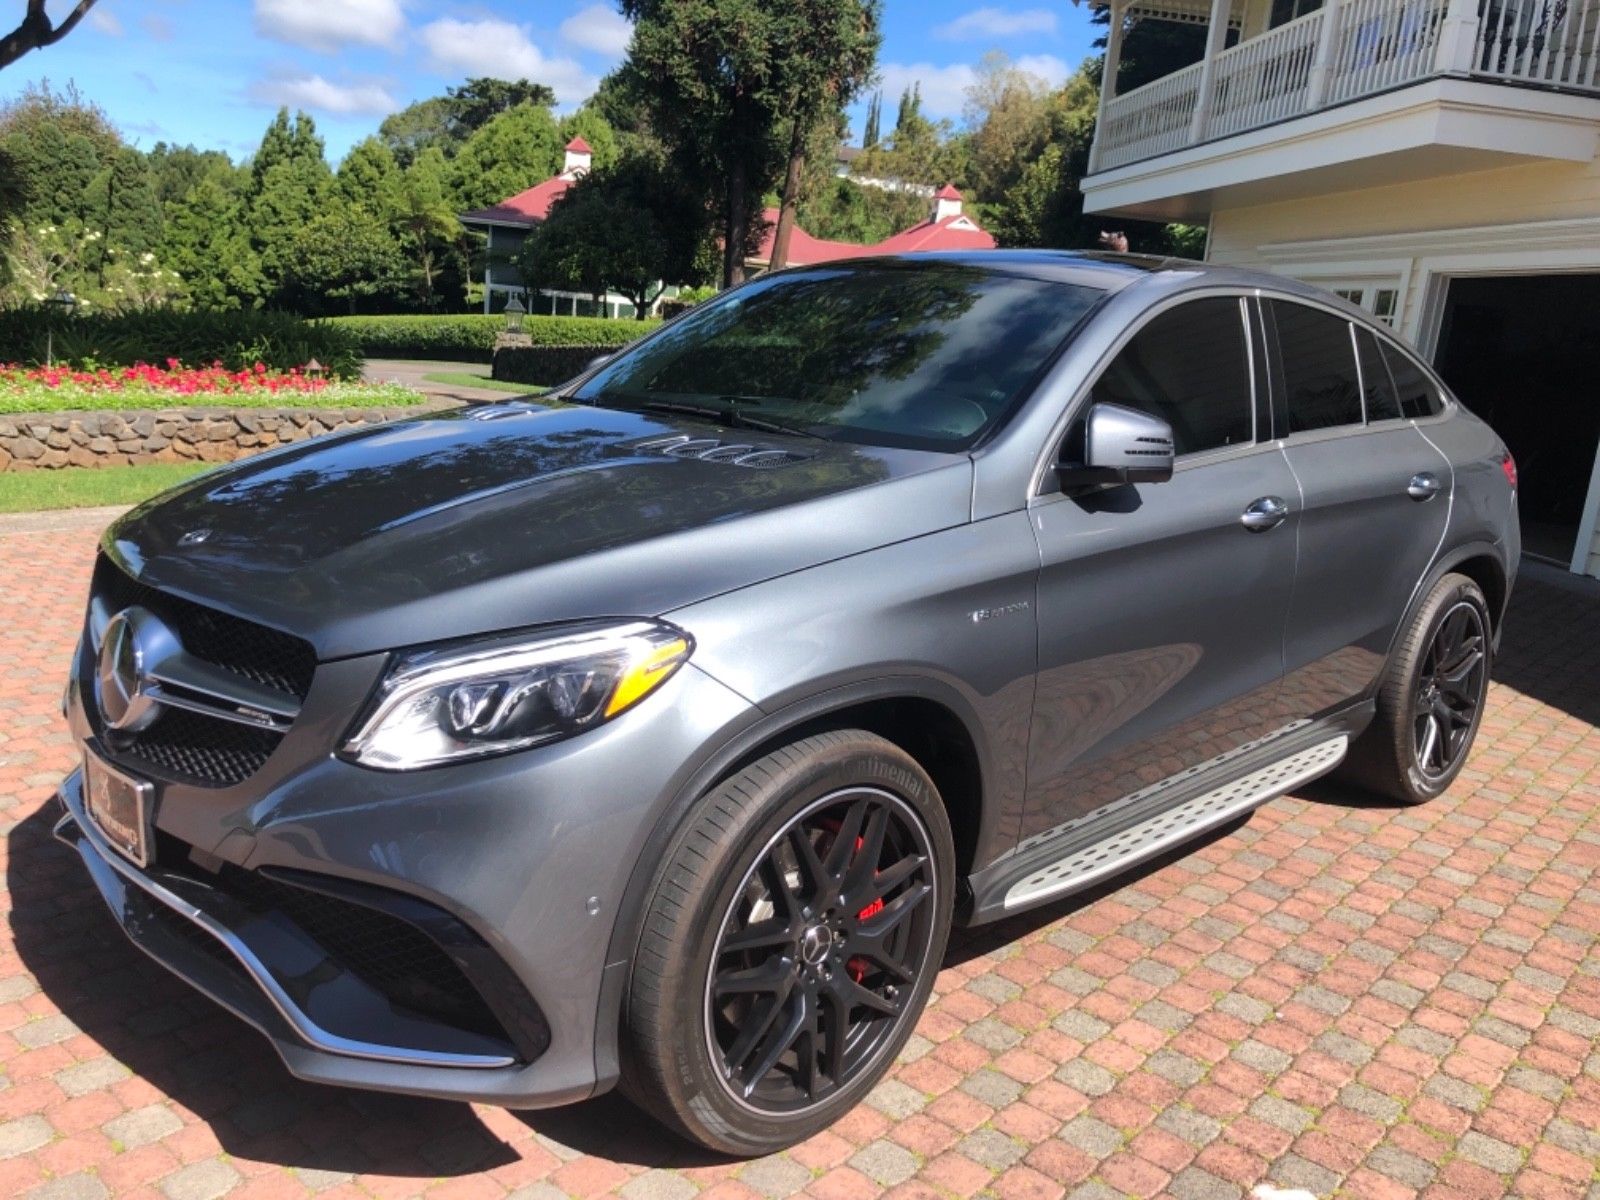 18 Mercedes Benz Other Mercedes Gle 63 S Amg Coupe 18 19 Is In Stock And For Sale 24carshop Com